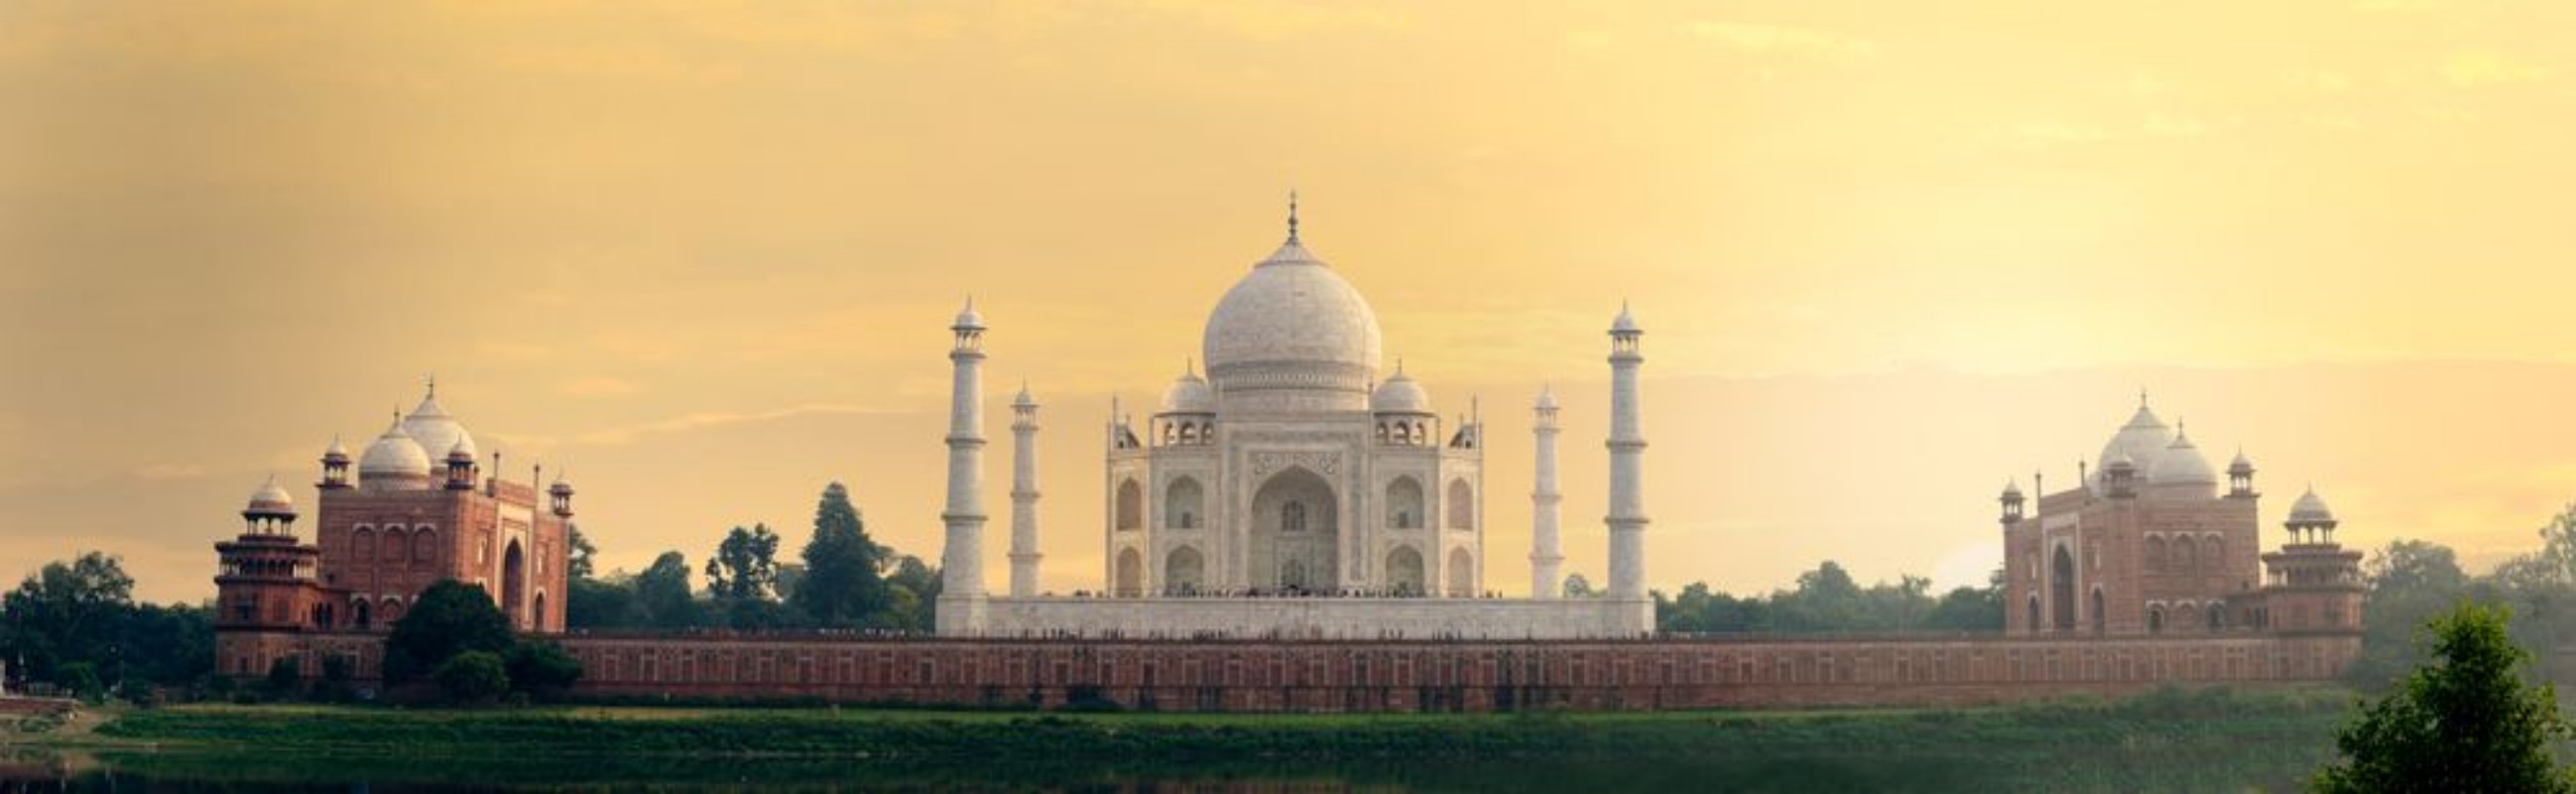 Picture of Taj Mahal mausoleum back view from Mehtab Bagh Agra Uttar Pradesh state India